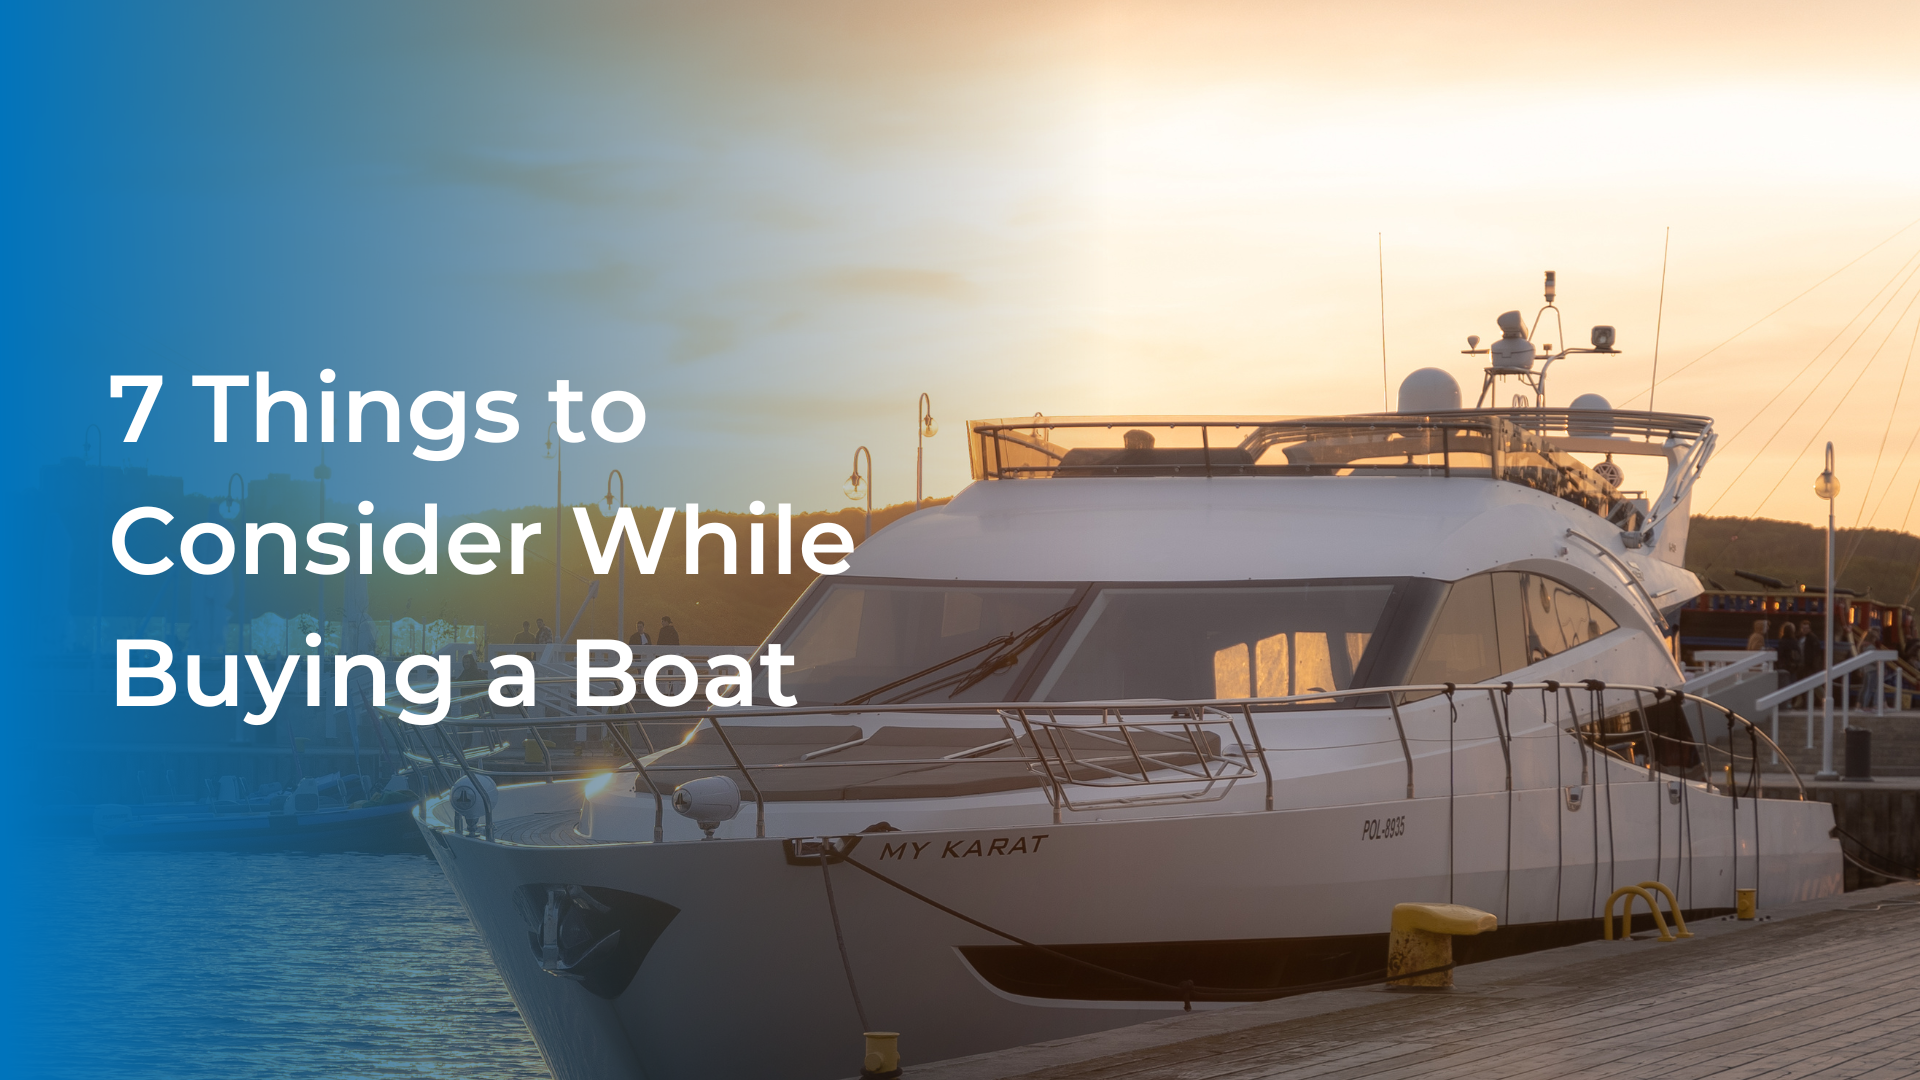 7 Things to Consider While Buying a Boat